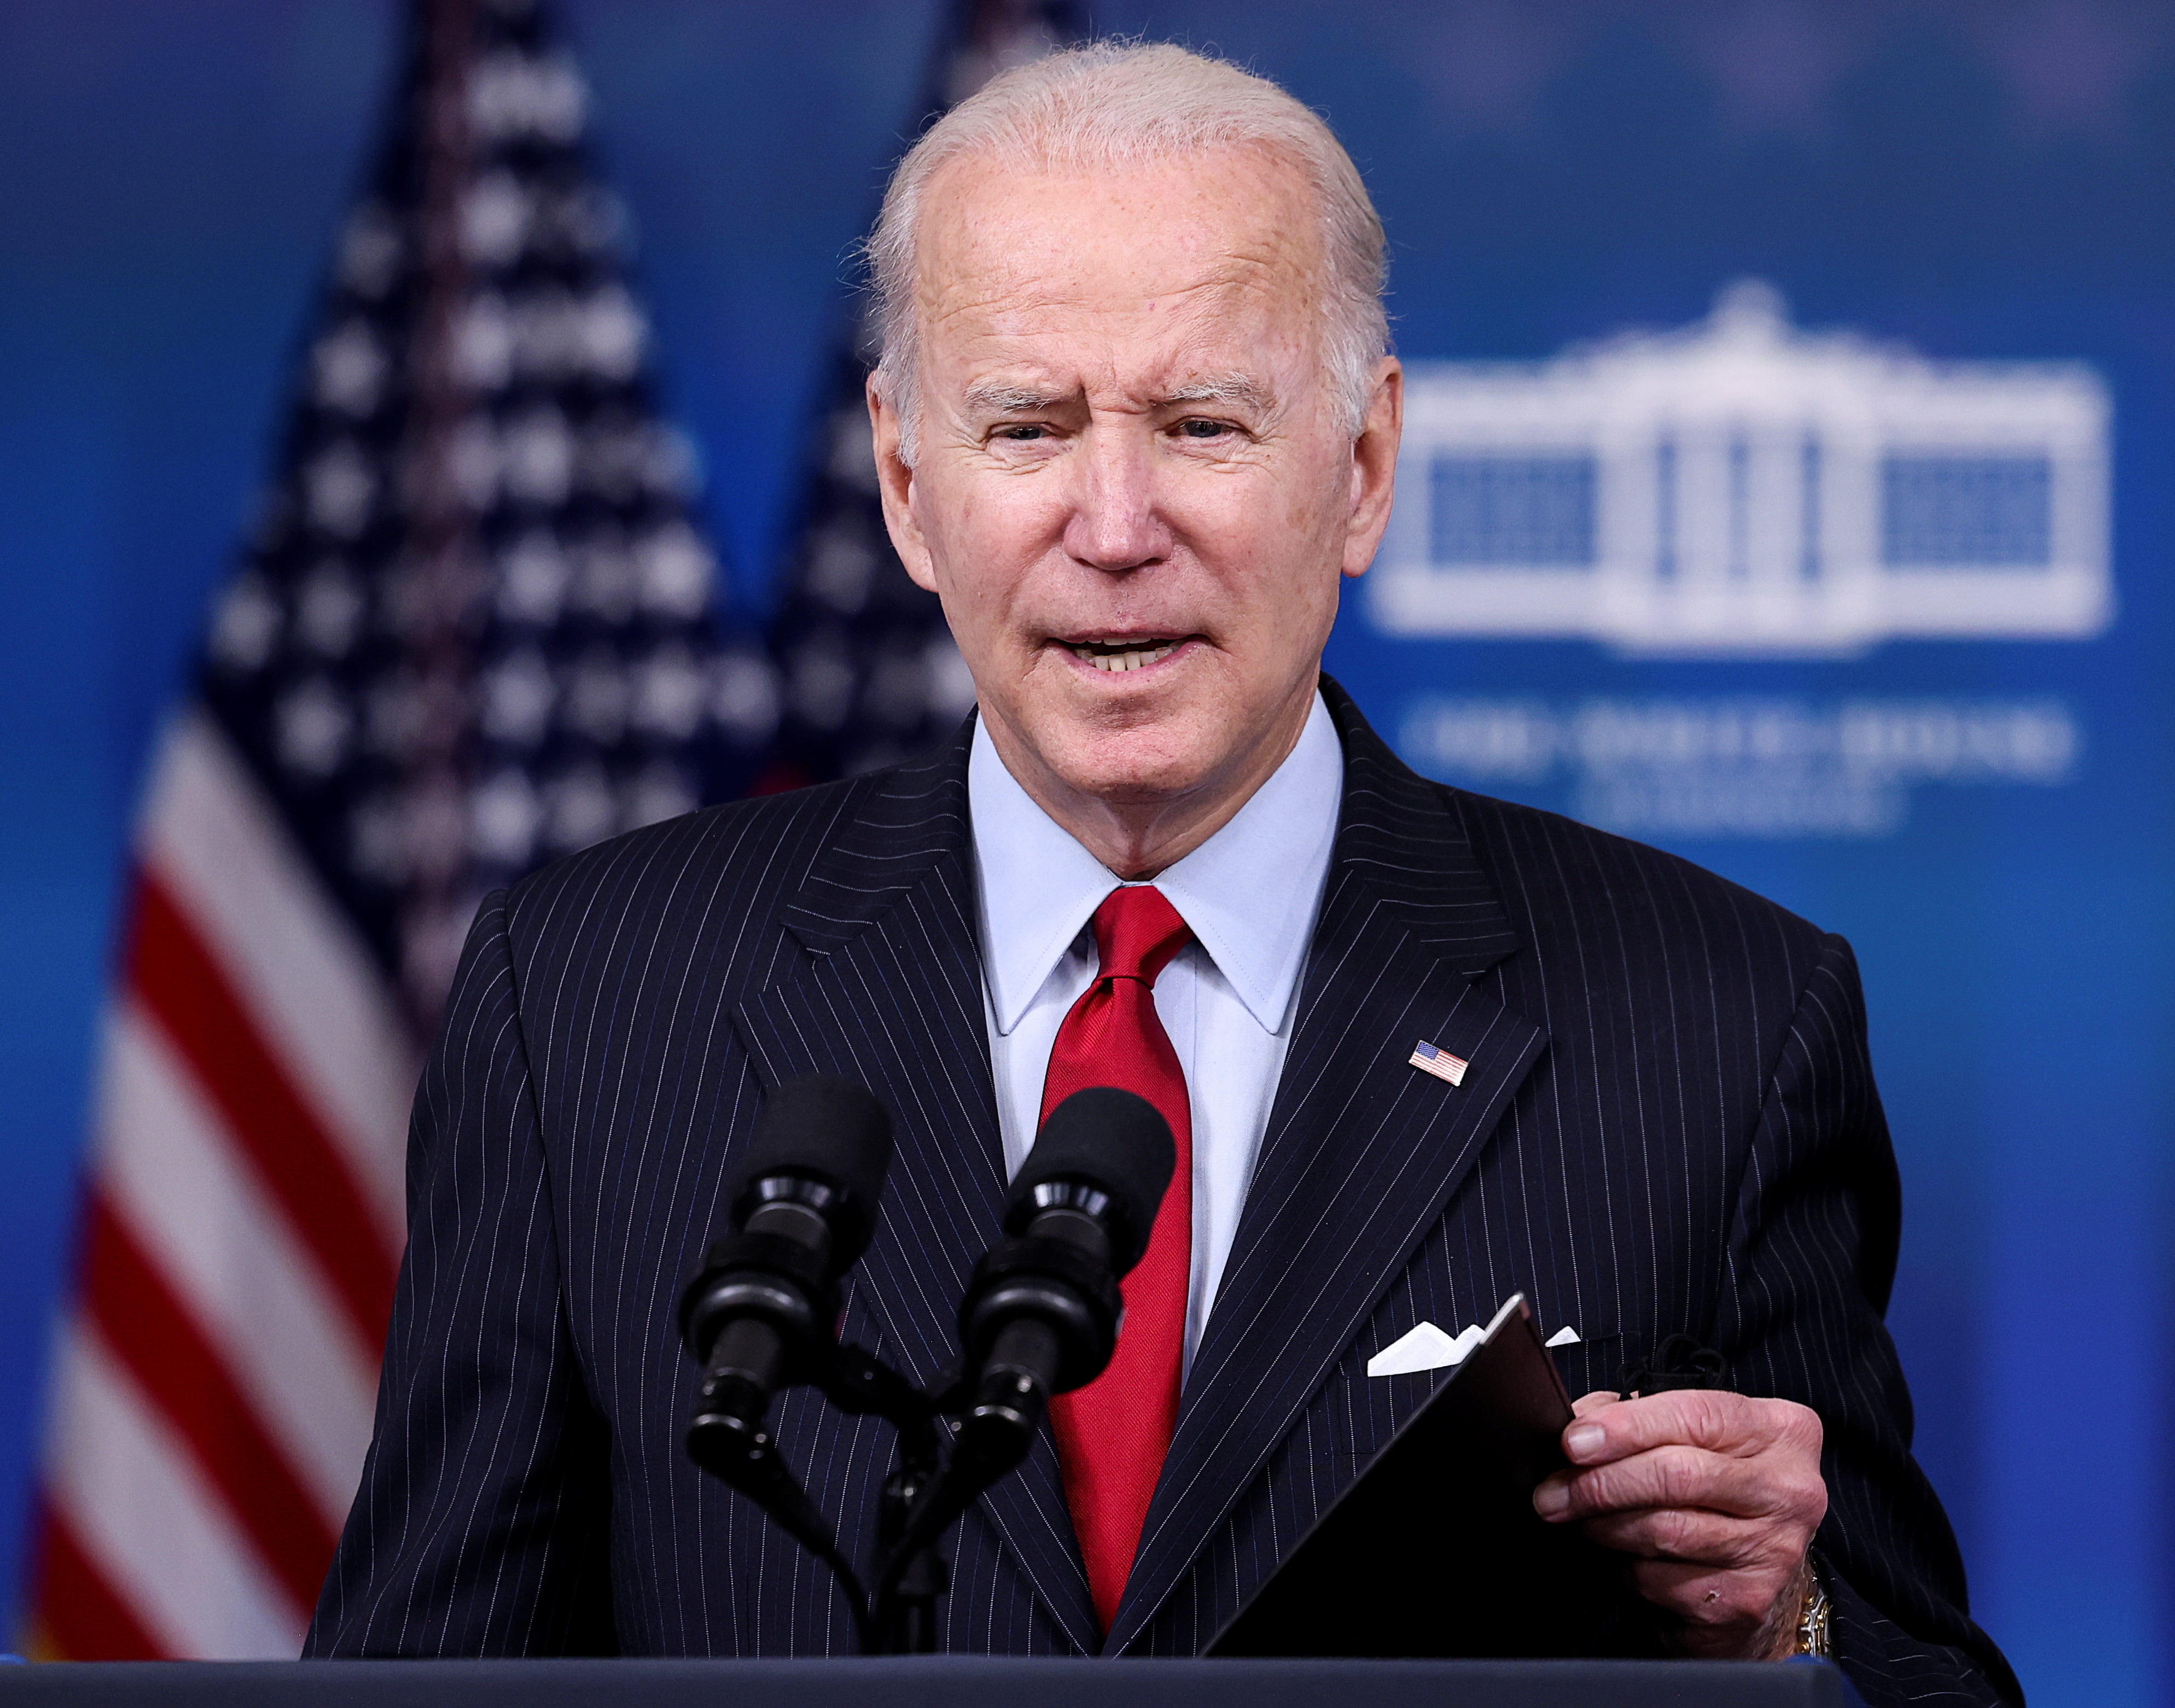 U.S. President Joe Biden delivers remarks on the economy at the White House in Washington